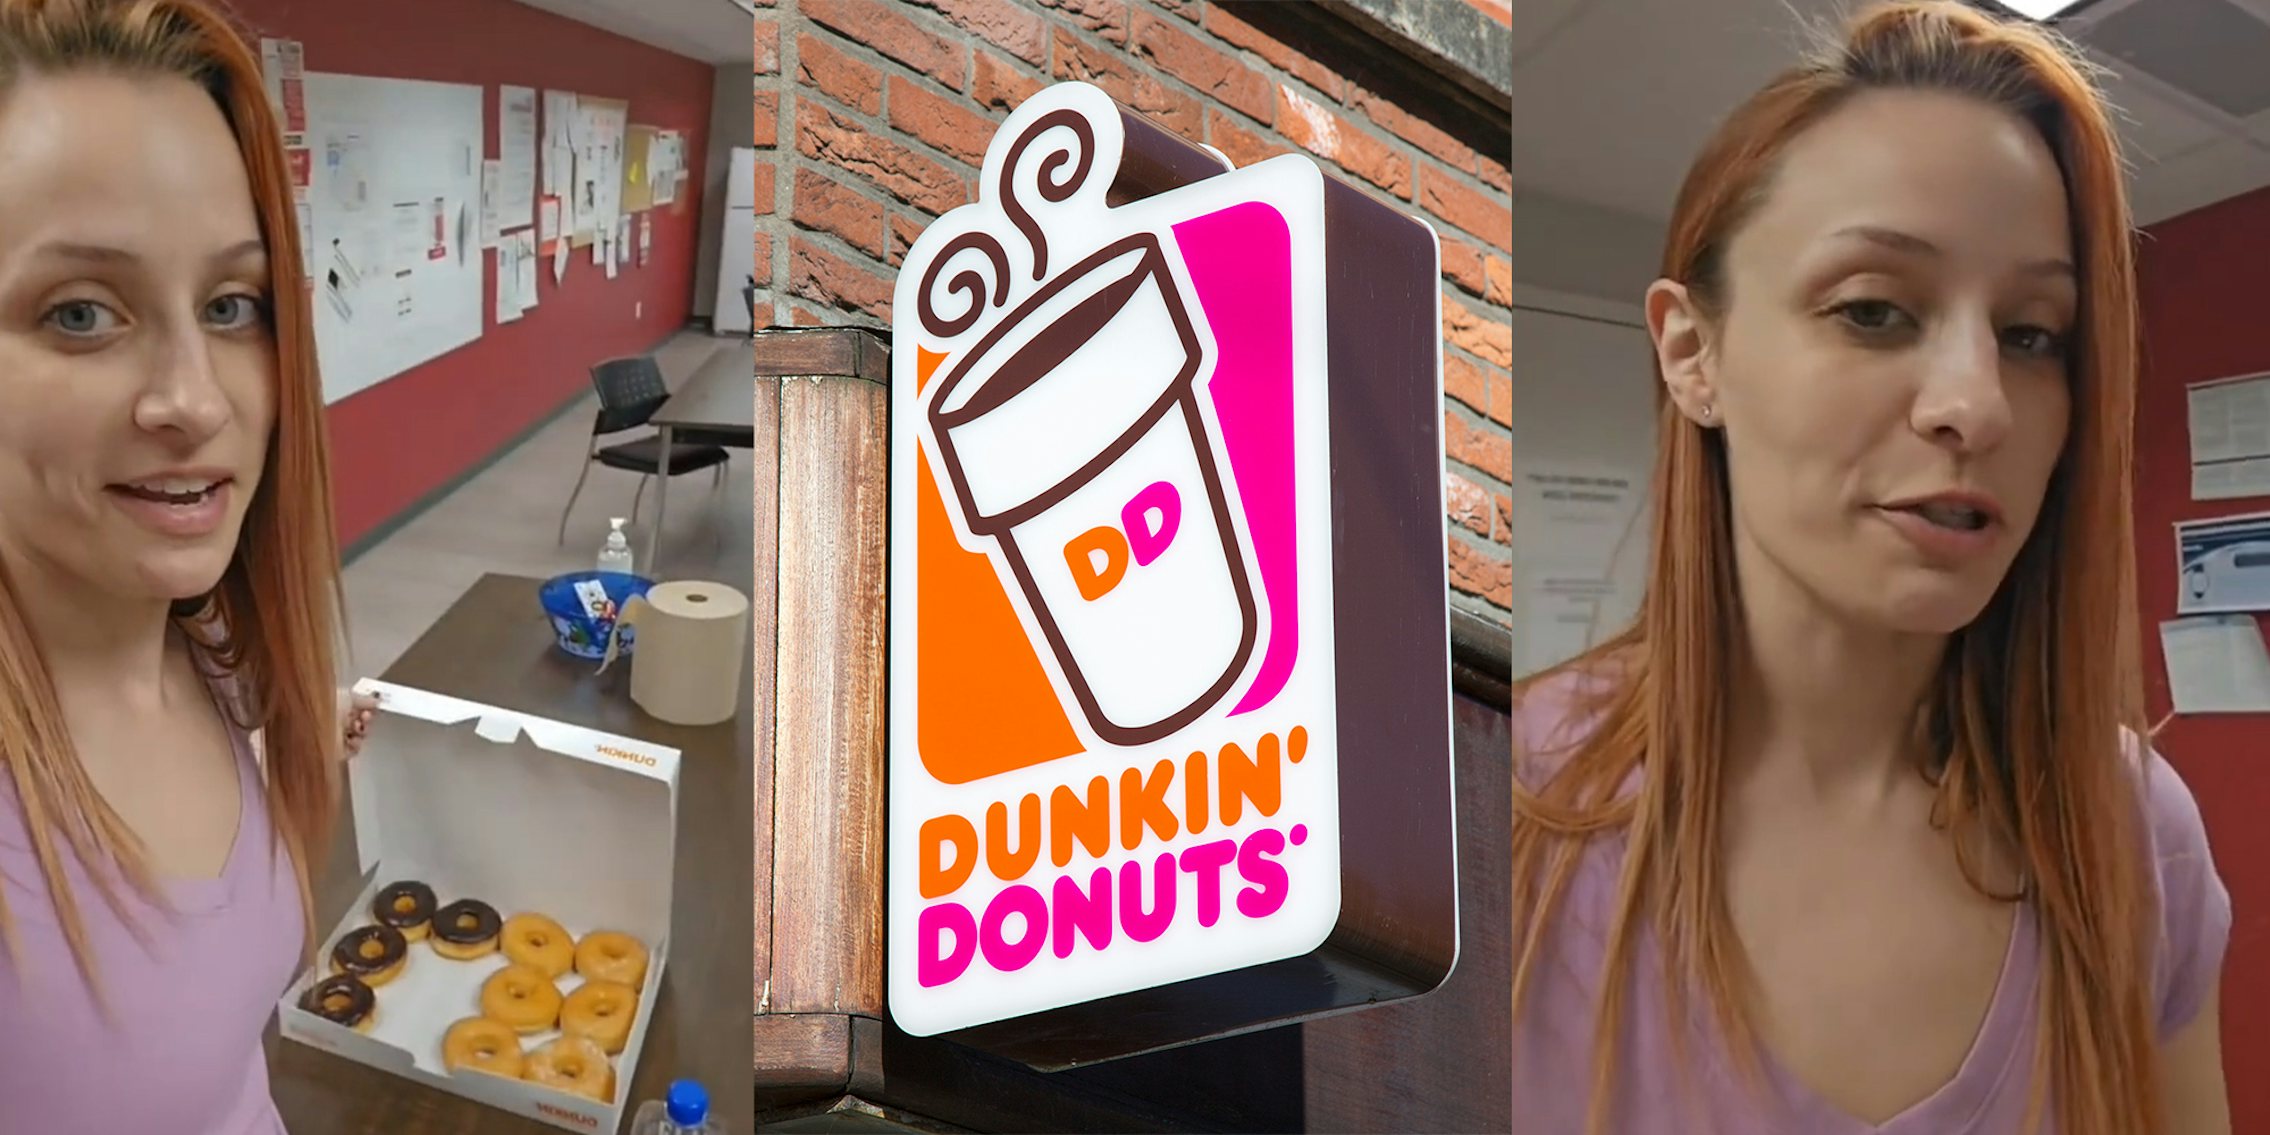 New worker brings Dunkin Donuts to break room to make friends